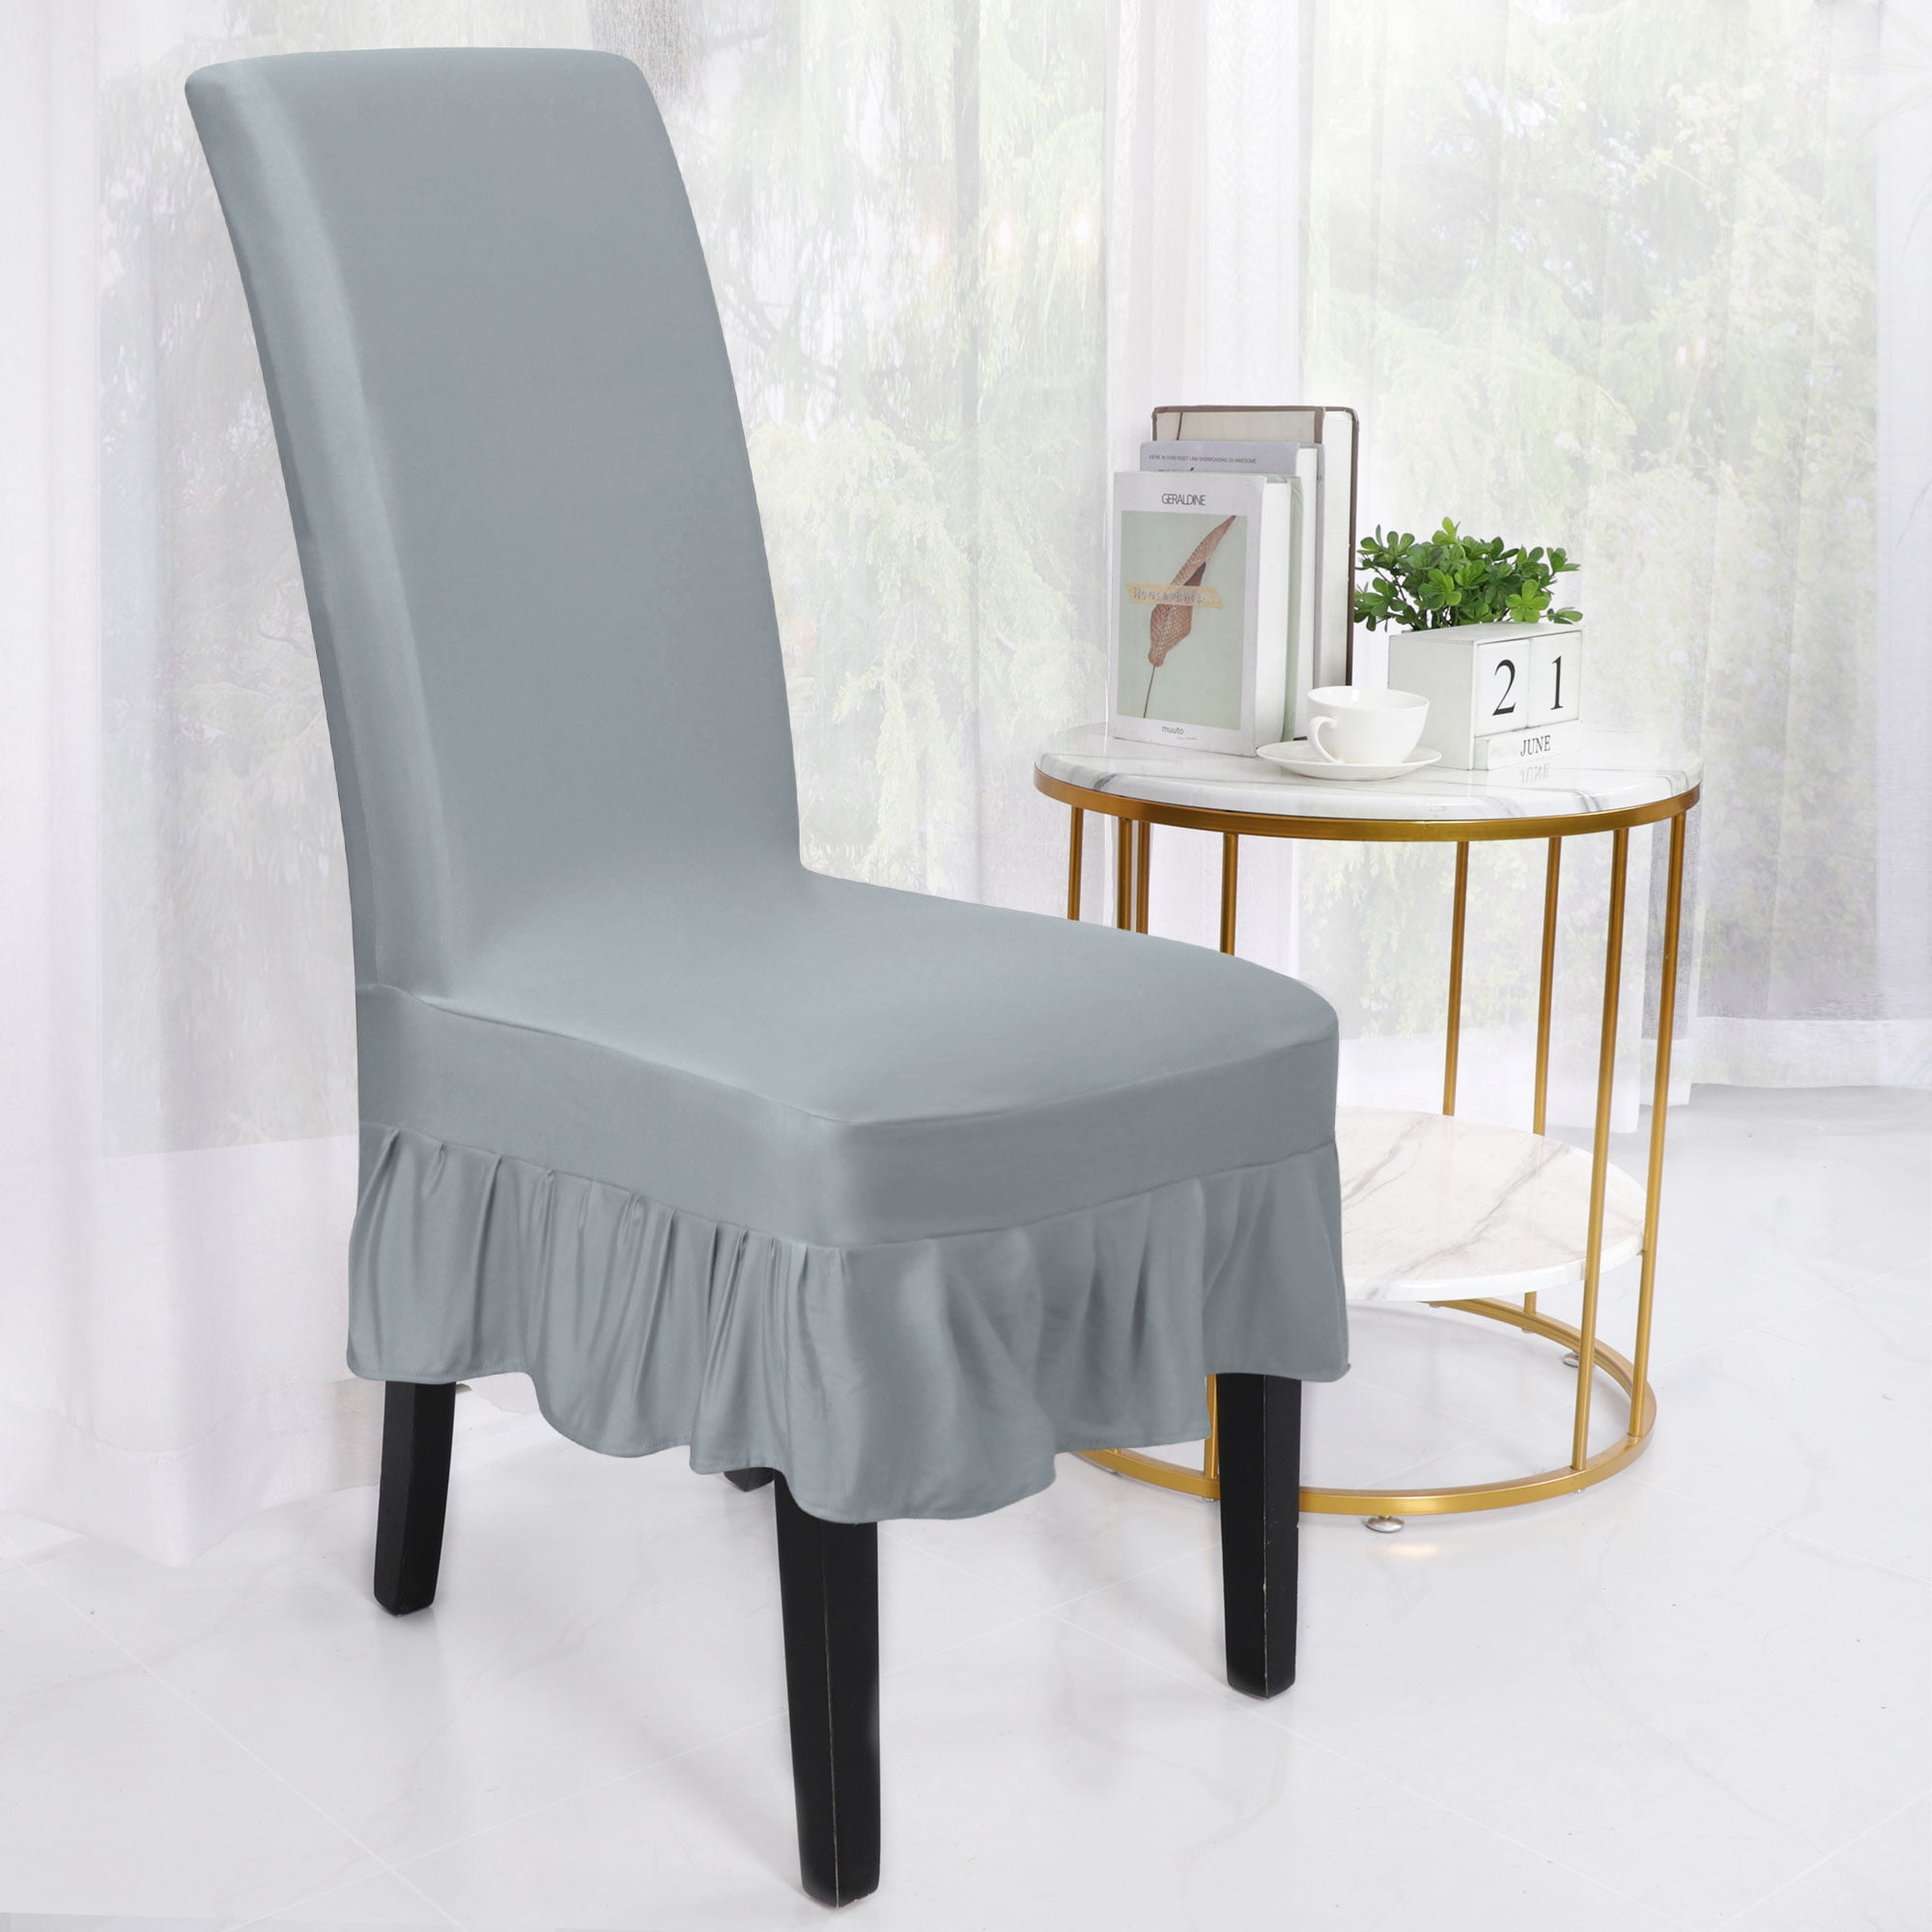 Details about   Spandex Stretch Dining Room Wedding Home Chair Covers Slip Decor Seat Cover US 